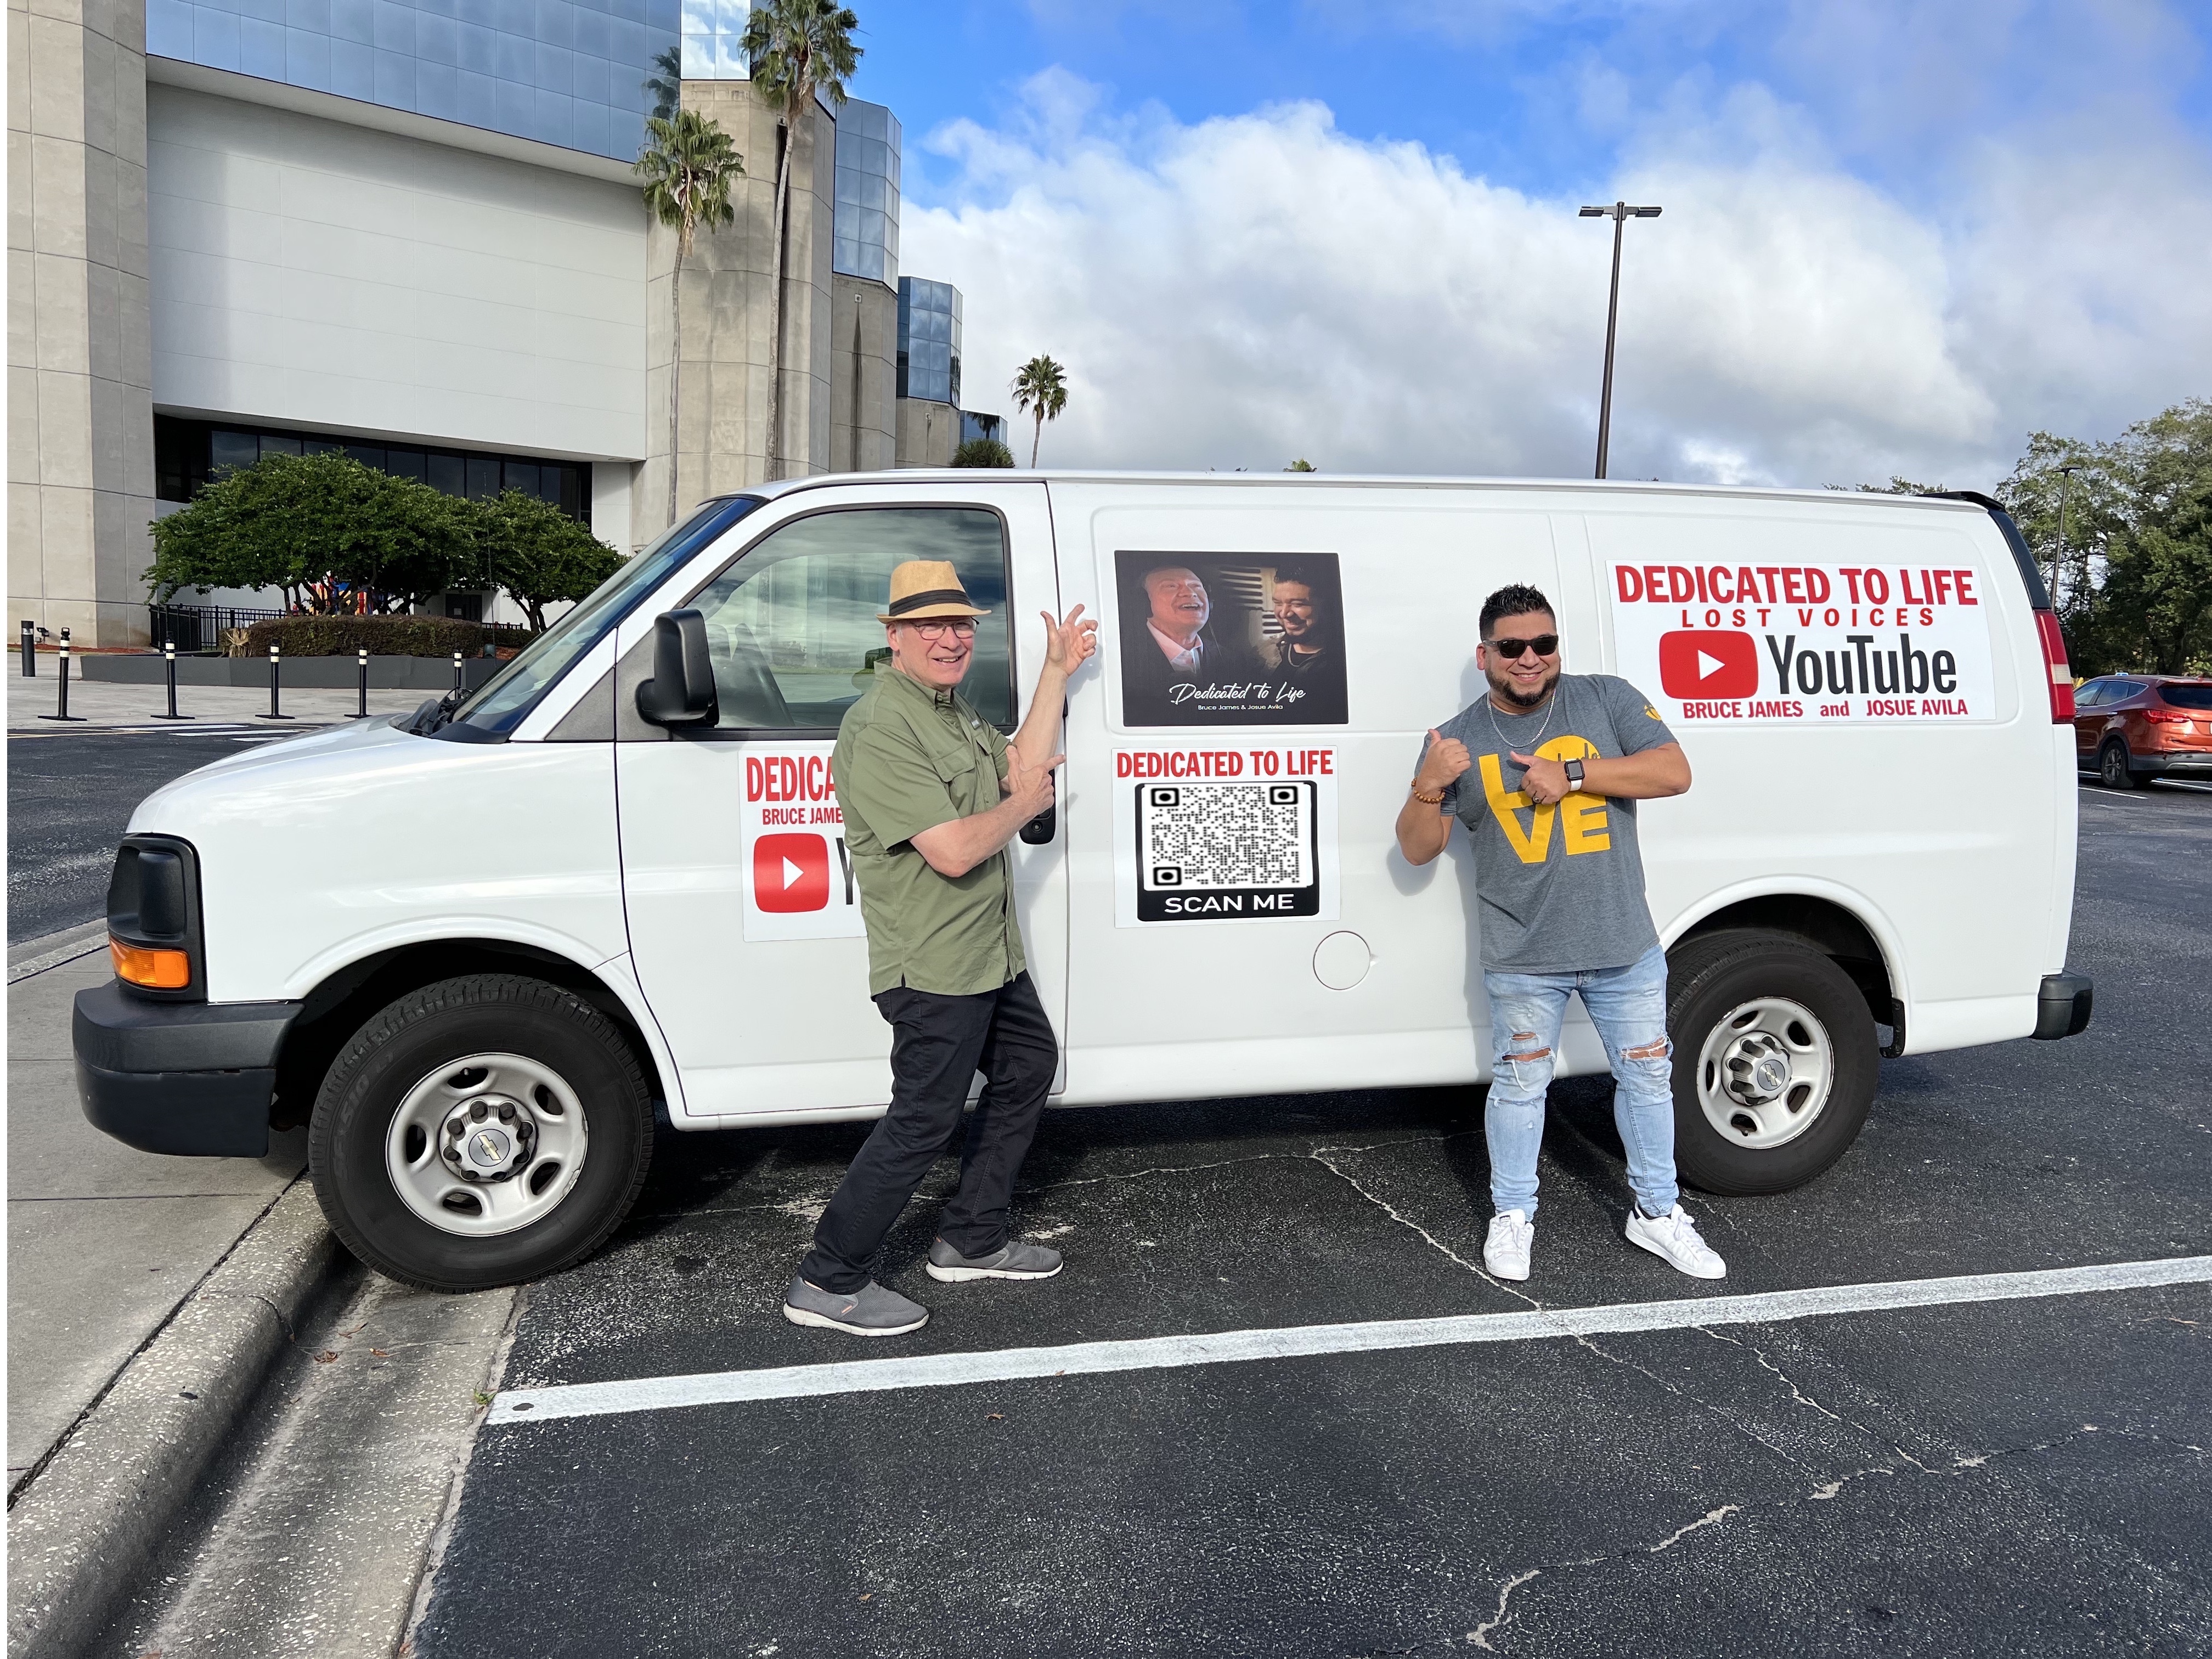 Bruce James and Josue Avila with the Dedicated to Life van